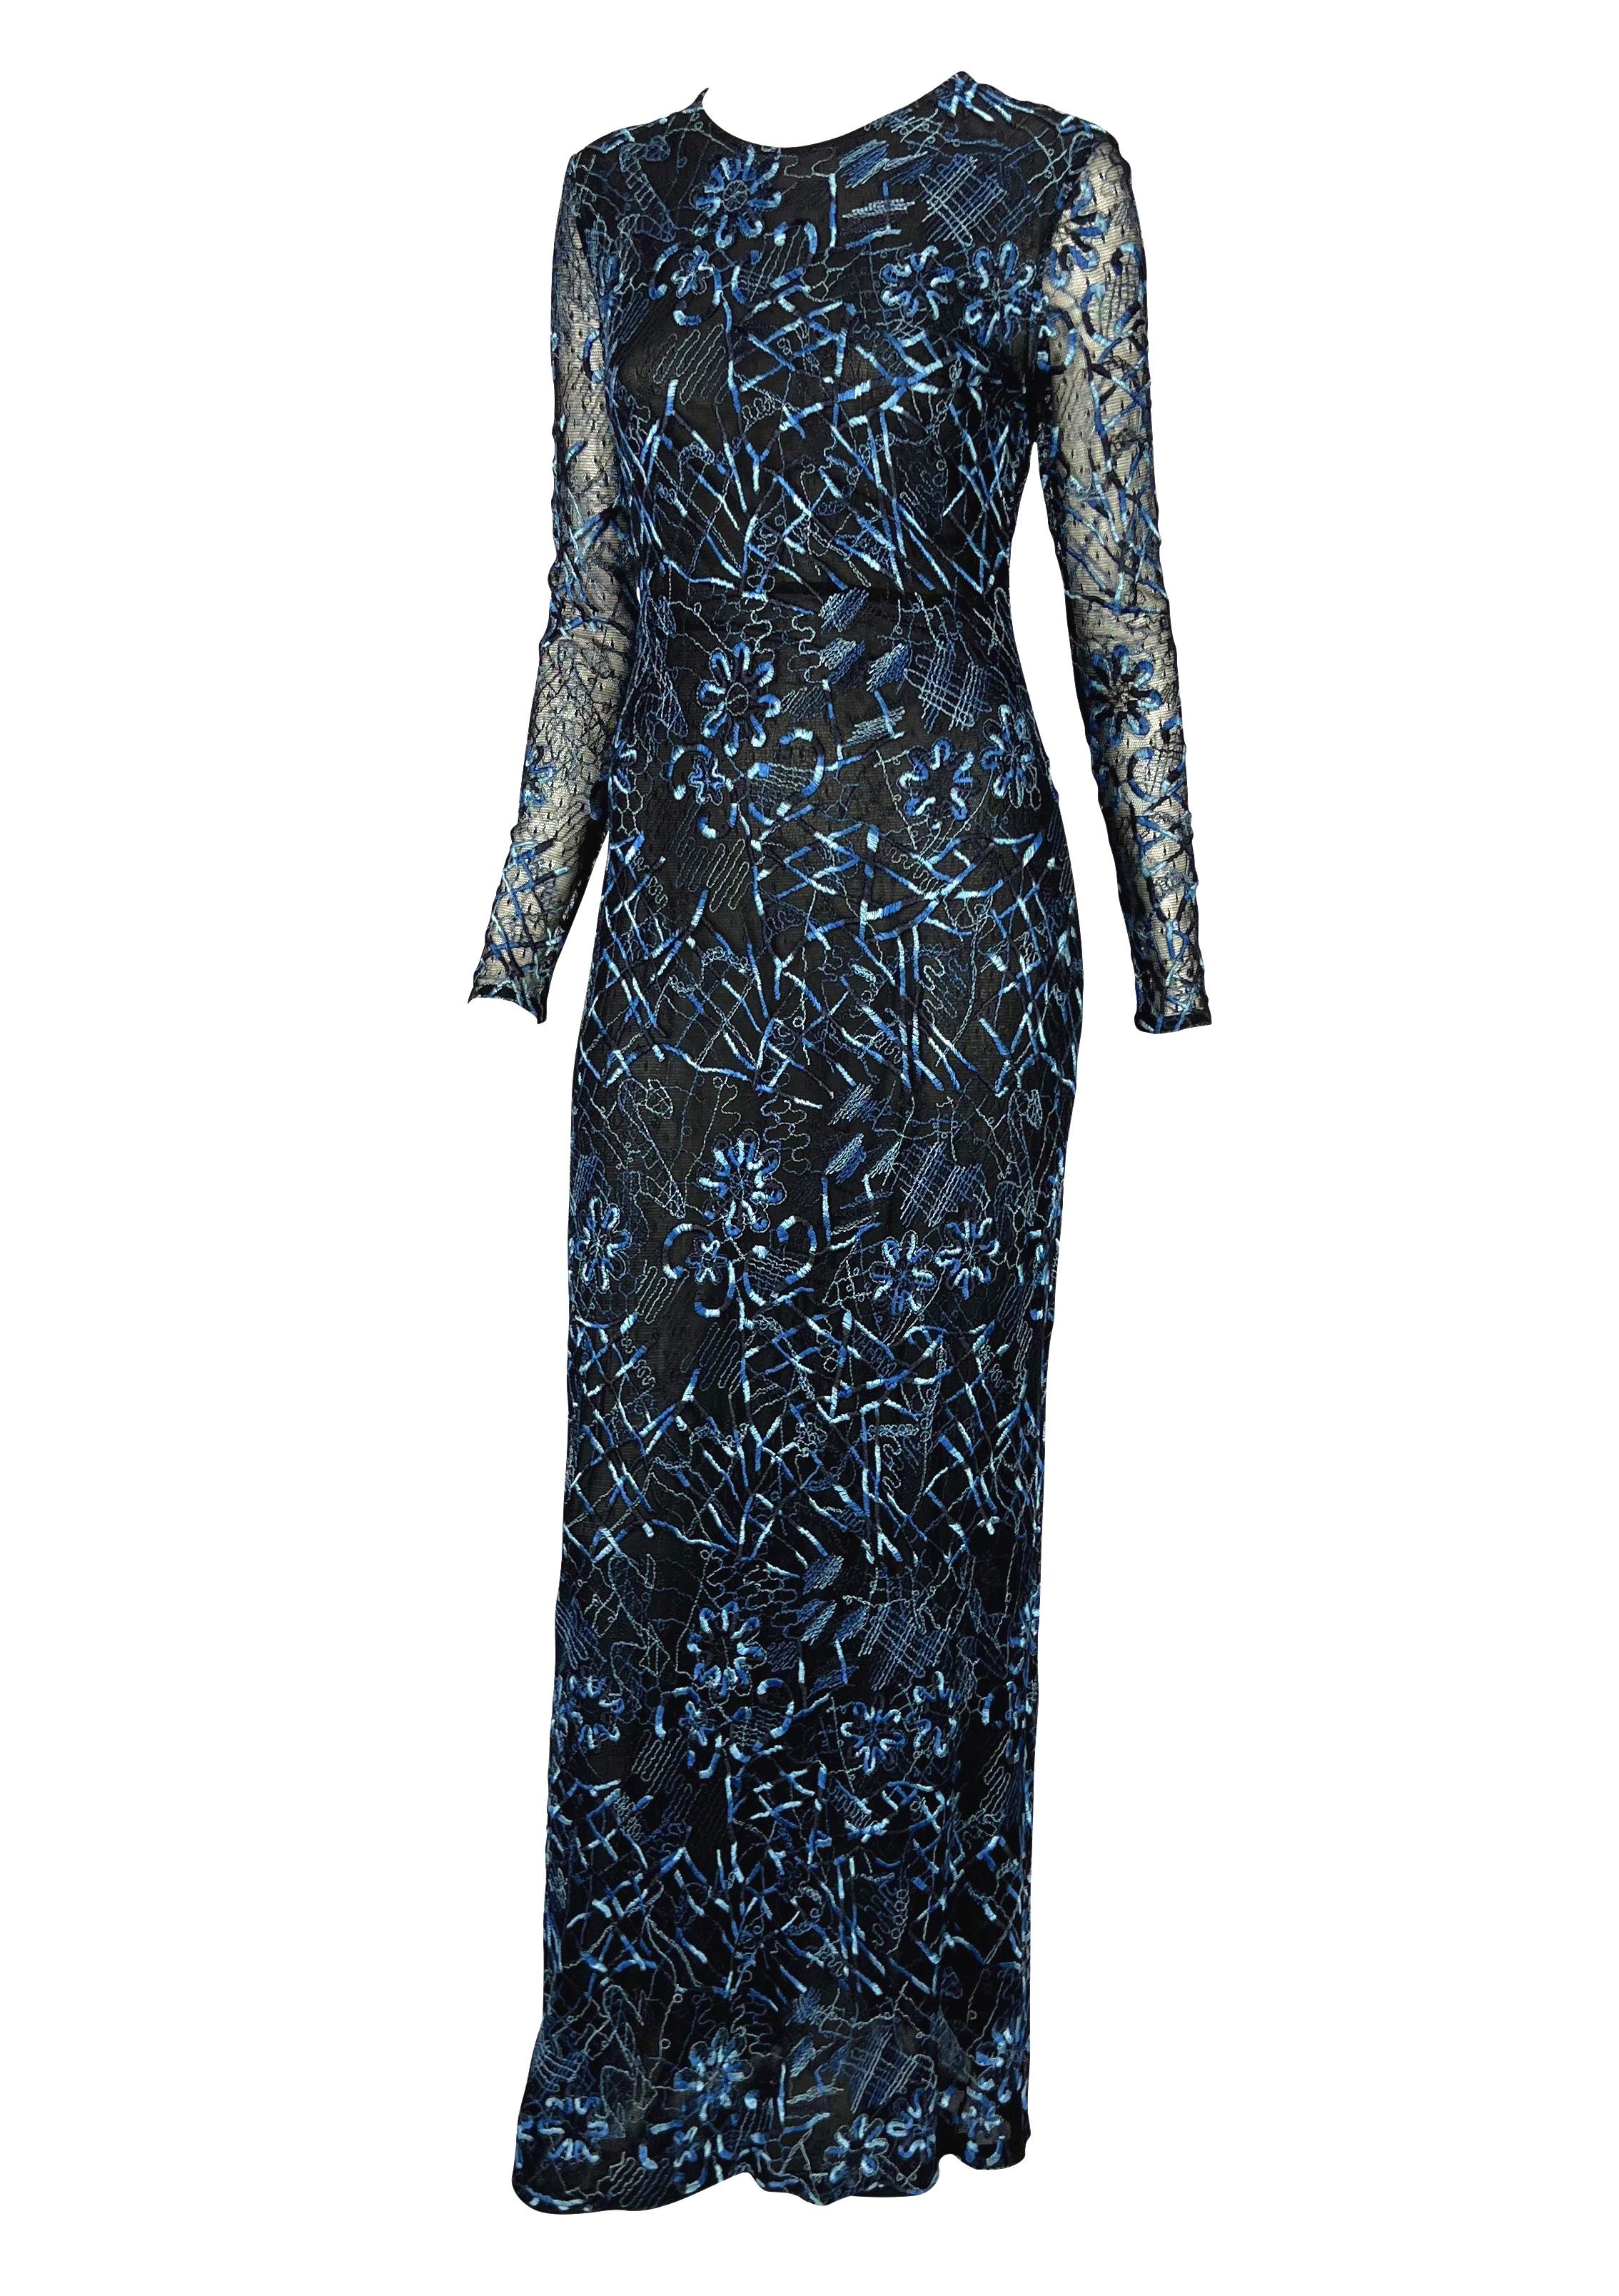 Presenting an incredible blue and black Christain Lacroix gown. From the Spring/Summer 1998 collection, this fabulous dress is constructed of black mesh lace and features an abstract floral embroidered pattern throughout. The column dress is made